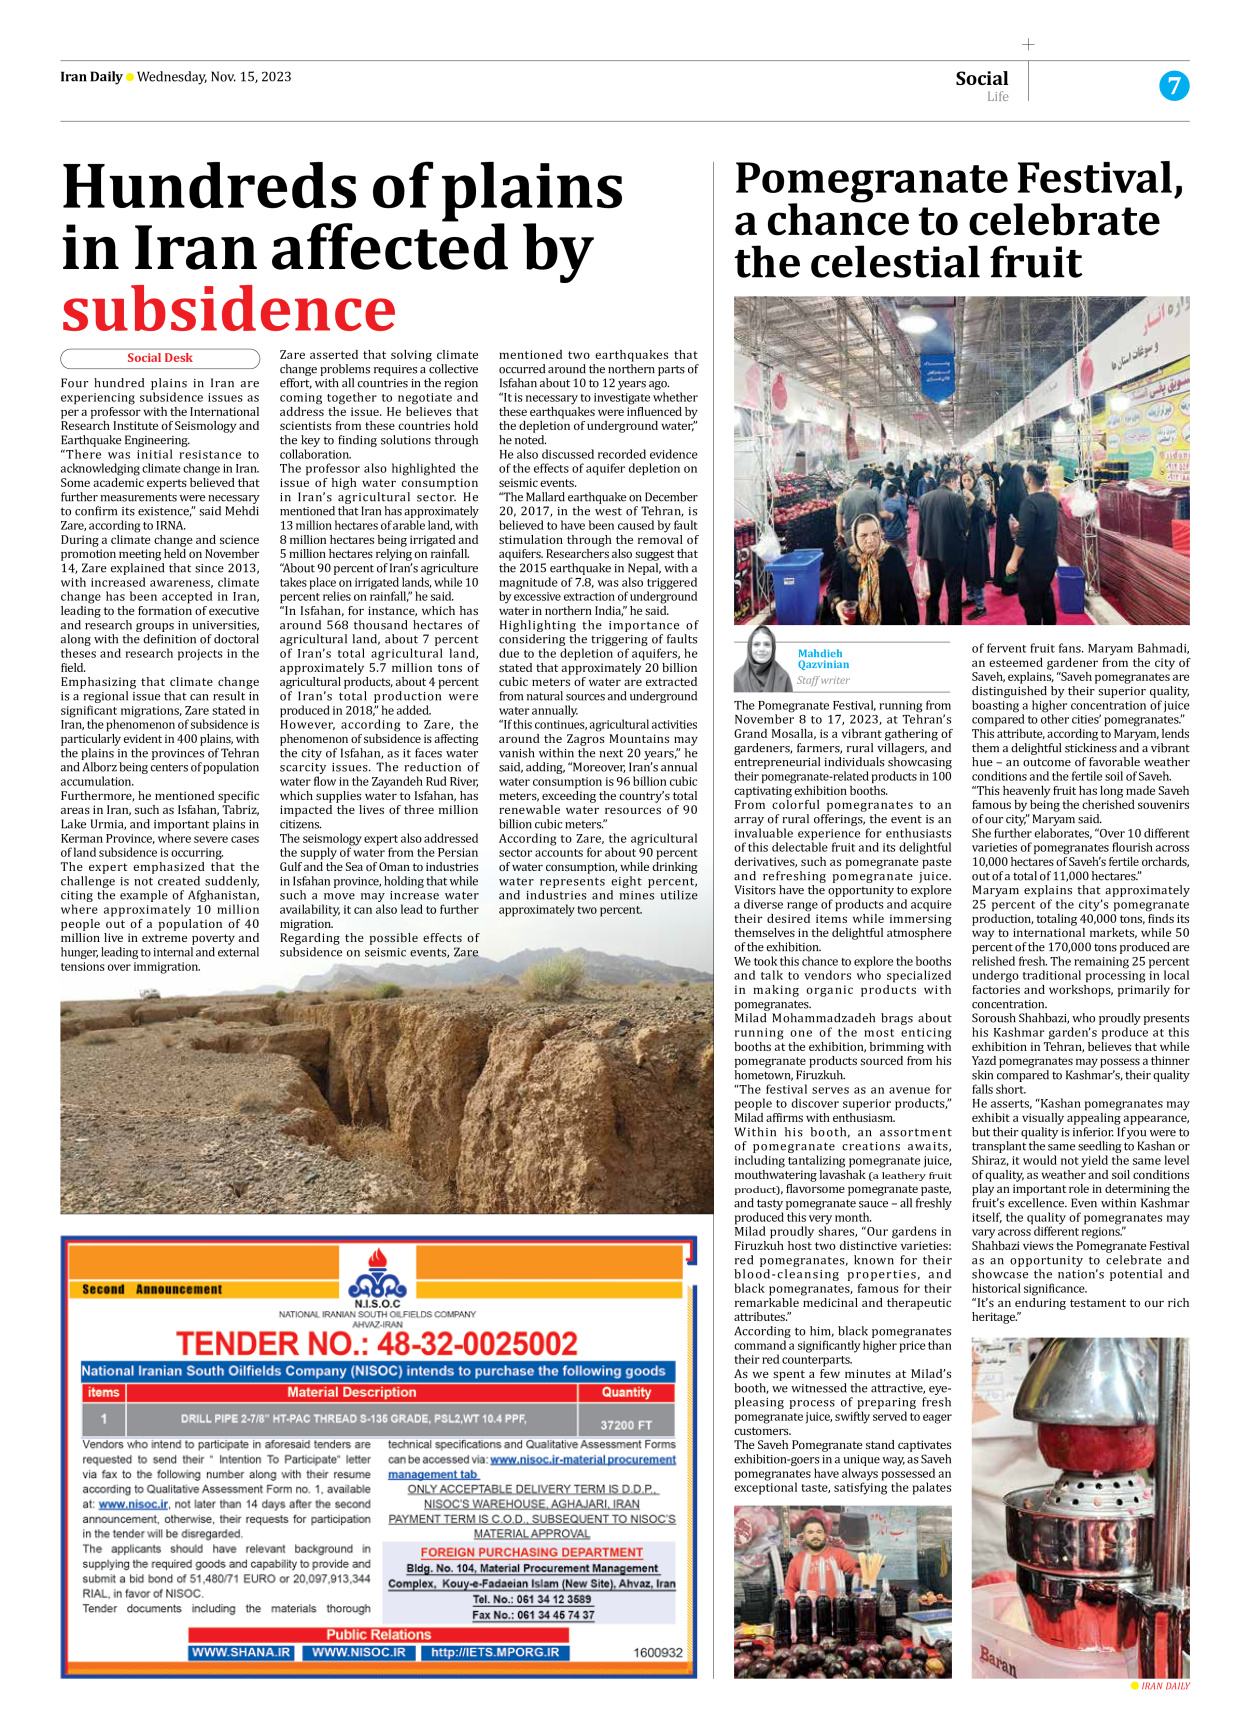 Iran Daily - Number Seven Thousand Four Hundred and Thirty Five - 15 November 2023 - Page 7